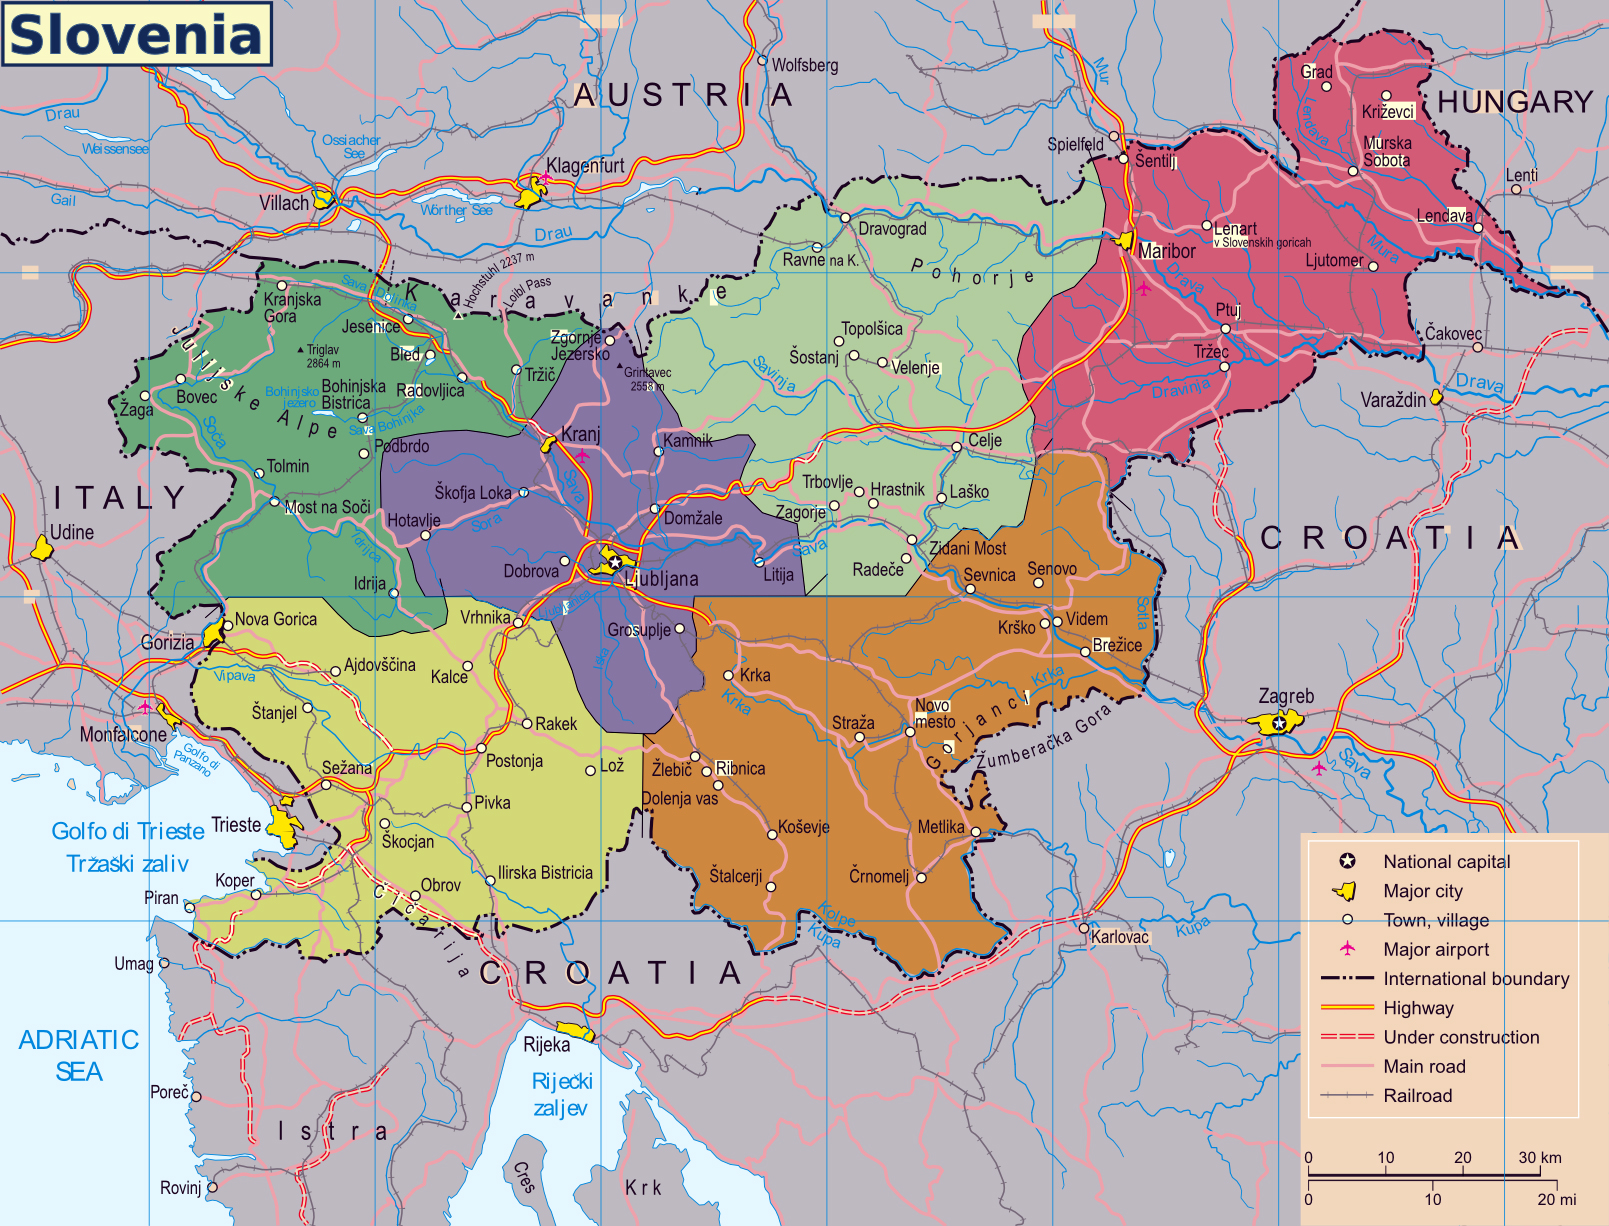 Large map of Slovenia with regions, roads, railroads, major cities and